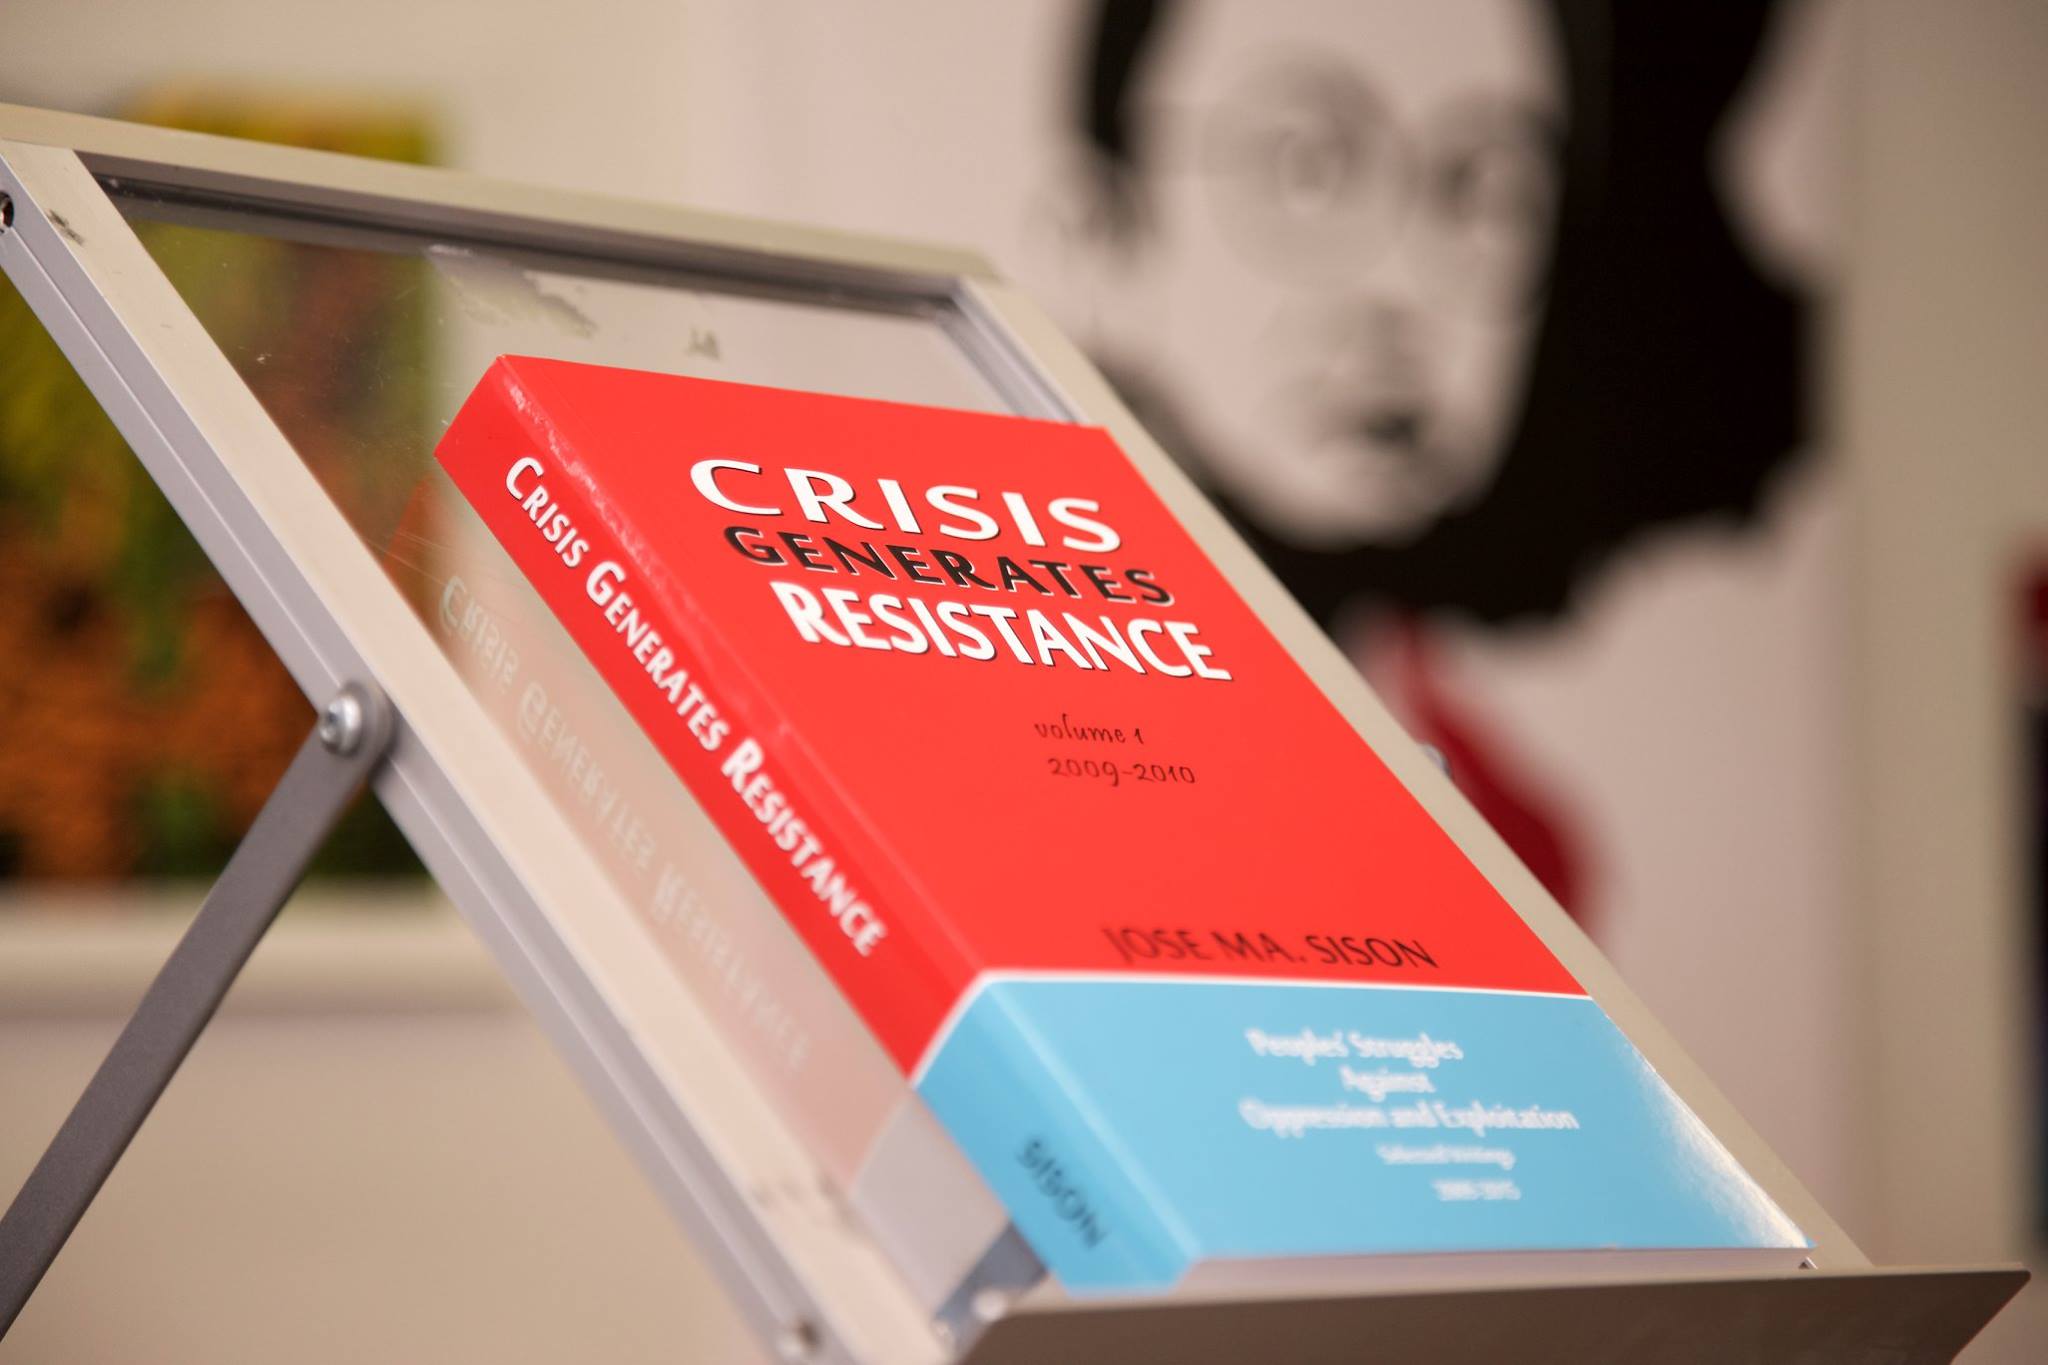 PROF. JOSE MARIA SISON’S BOOK, CRISIS GENERATES RESISTANCE: TIMELY RESPONSE TO UNFOLDING EVENTS OF IMPERTIALIST CRISIS AND PEOPLE’S RESISTANCE